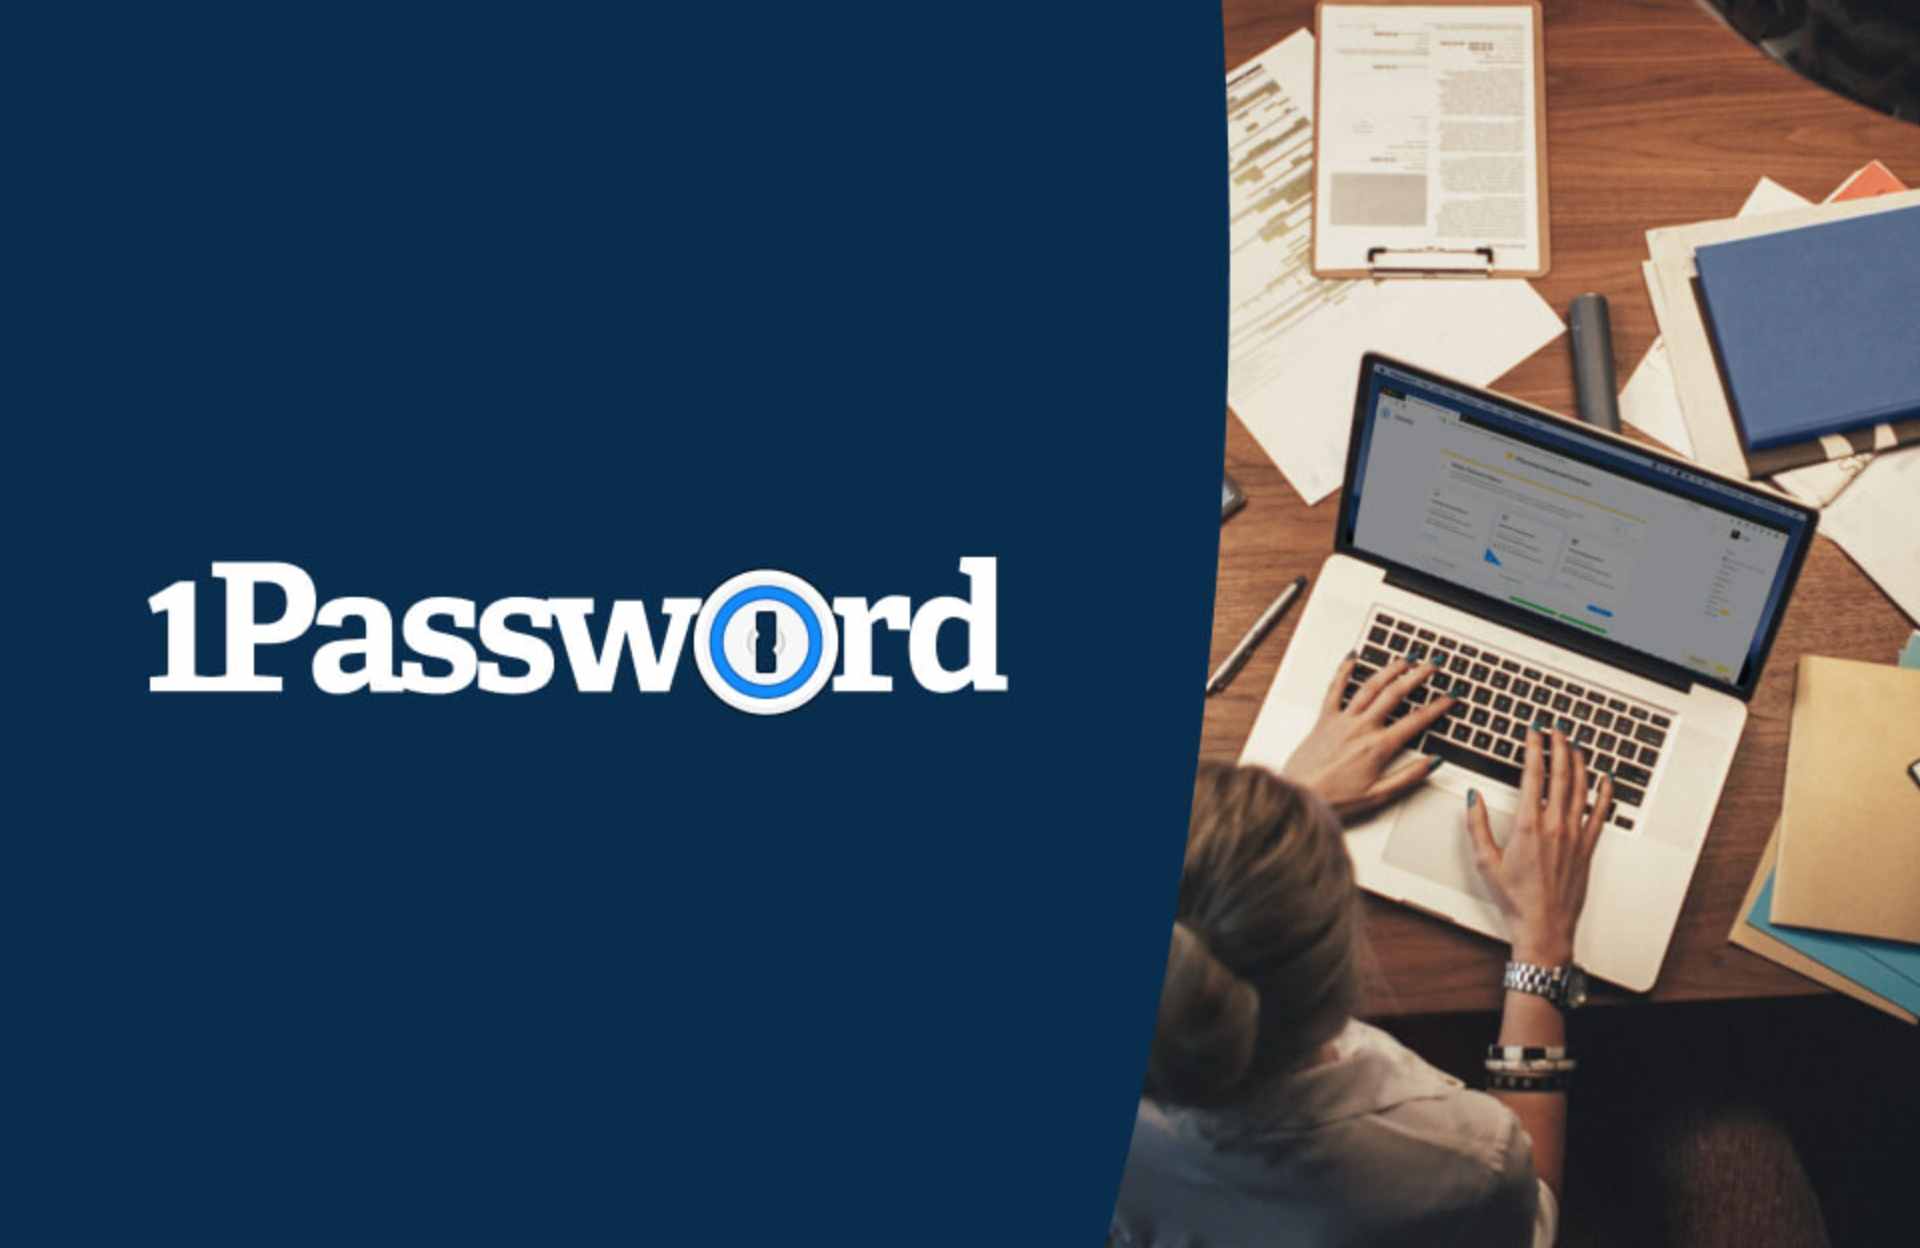 1Password: Your Trustworthy Password Manager for Enhanced Online Security